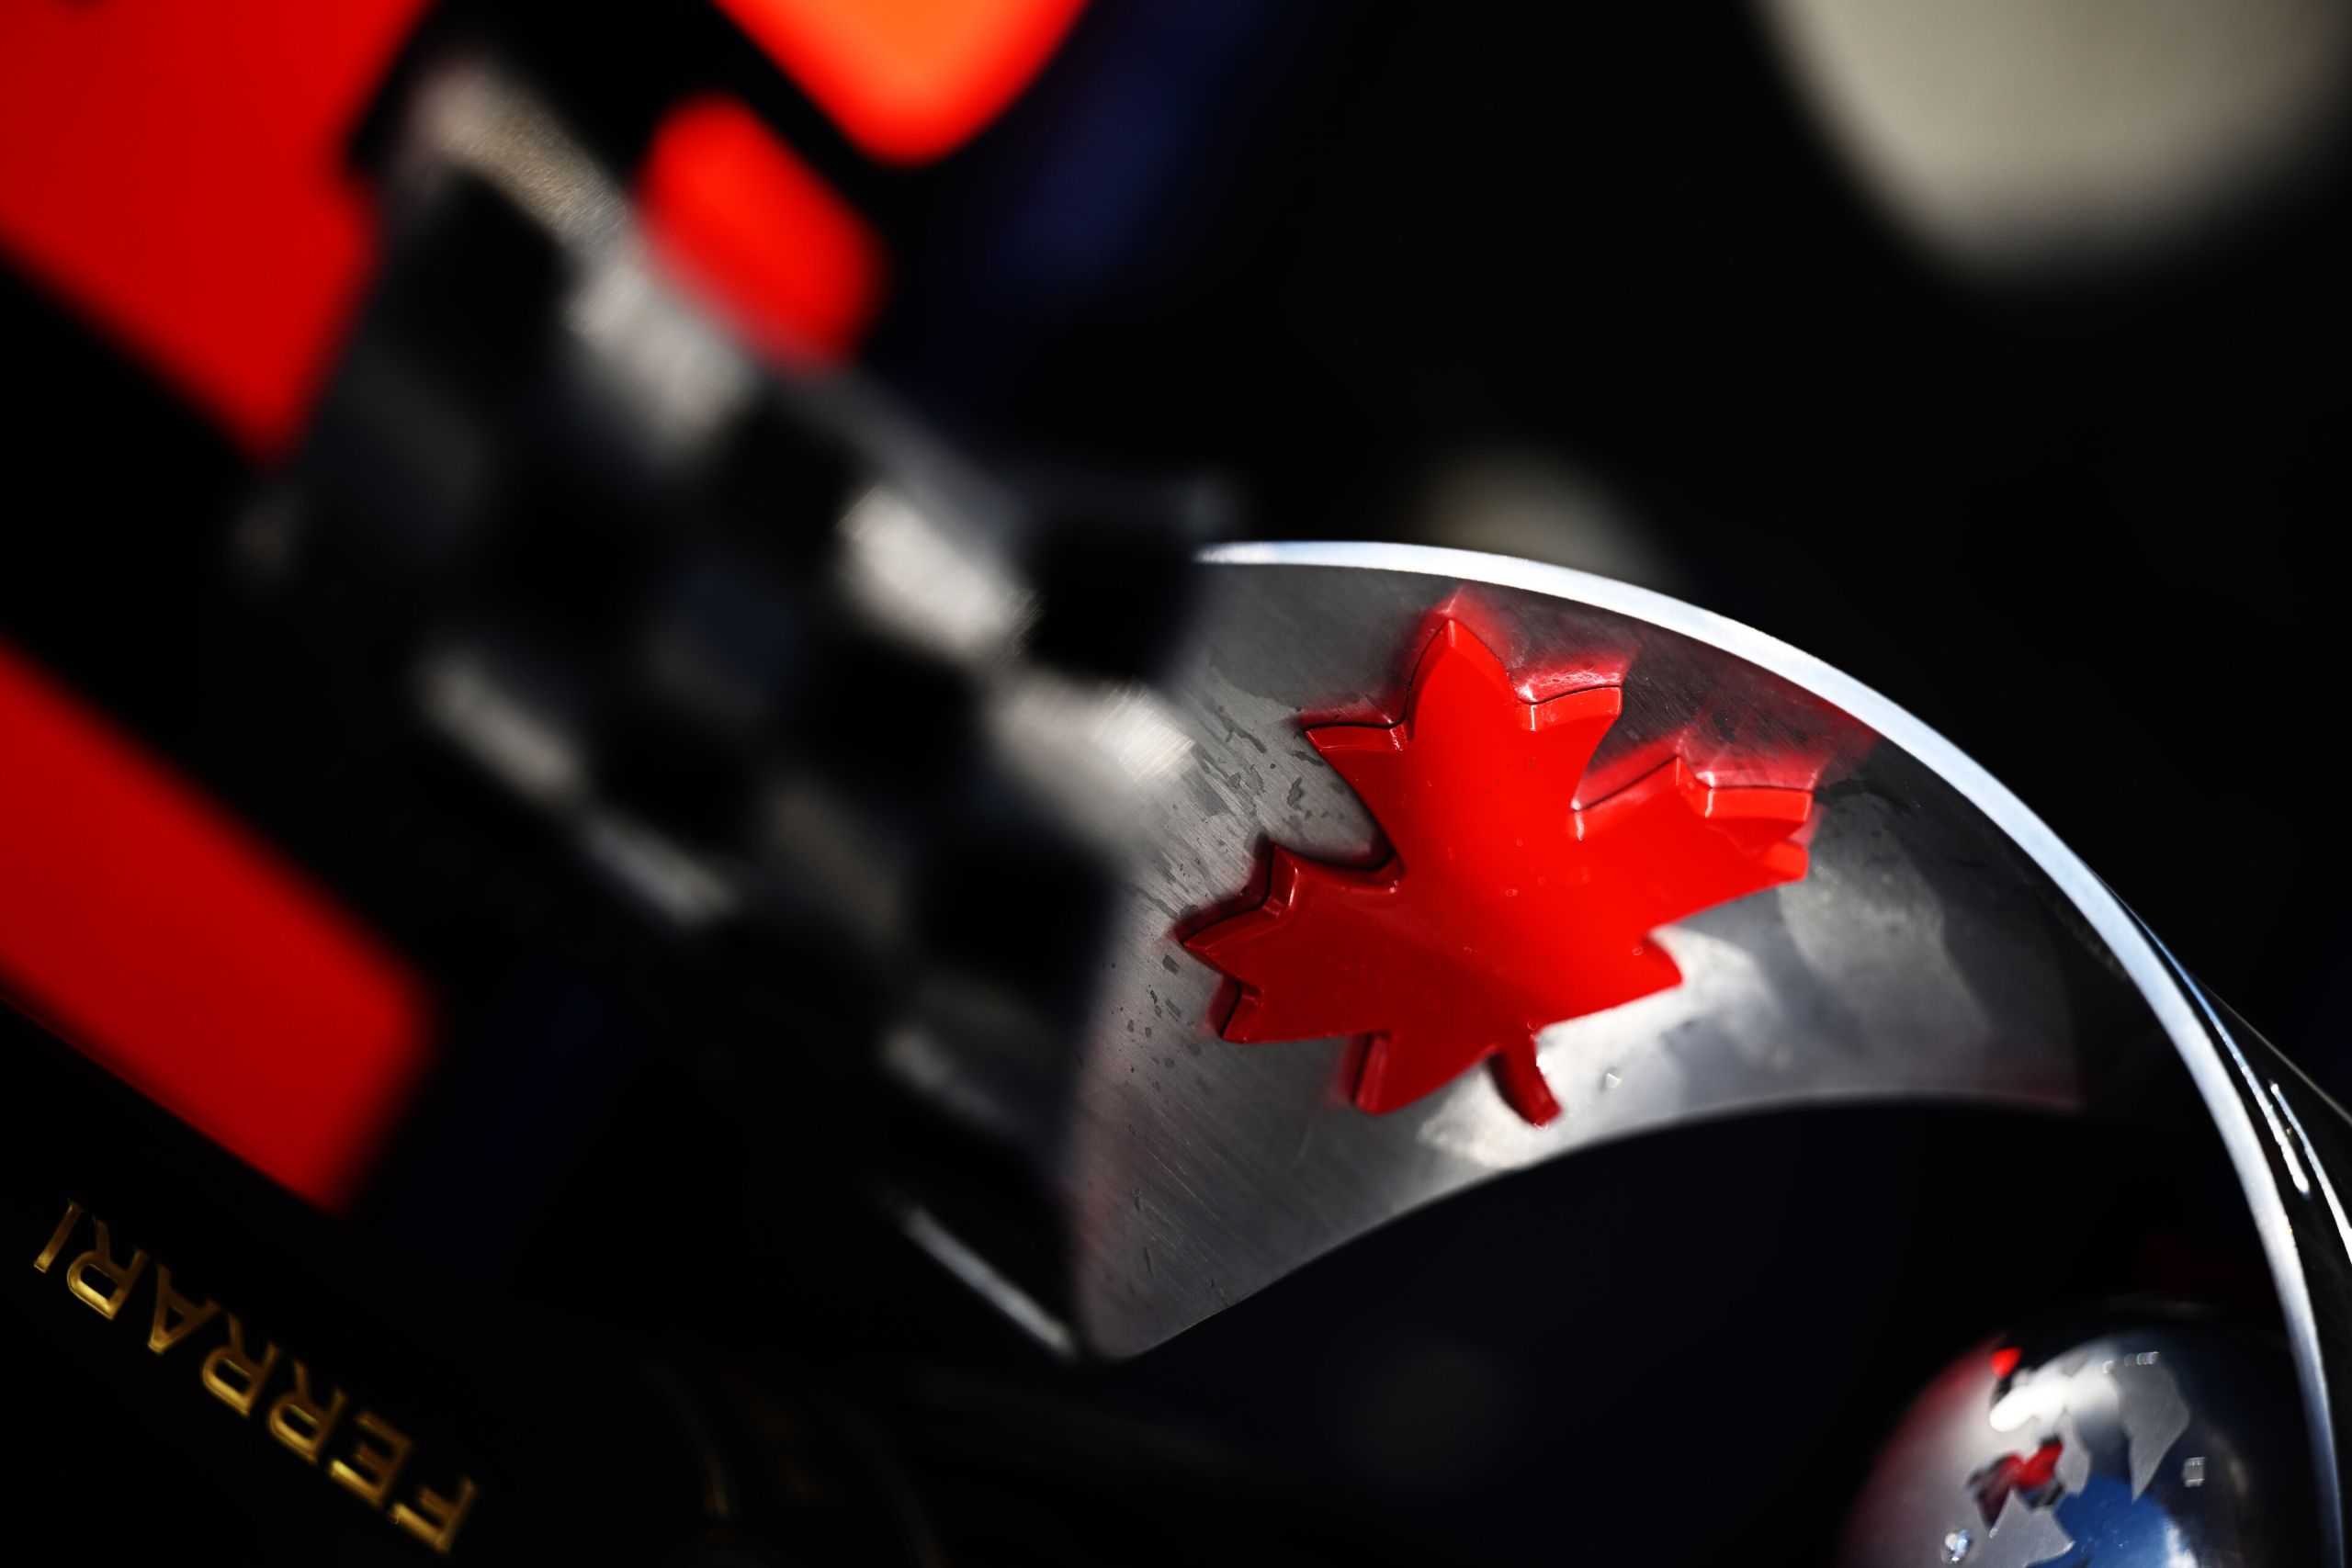 Where is the Canadian Grand Prix being held?